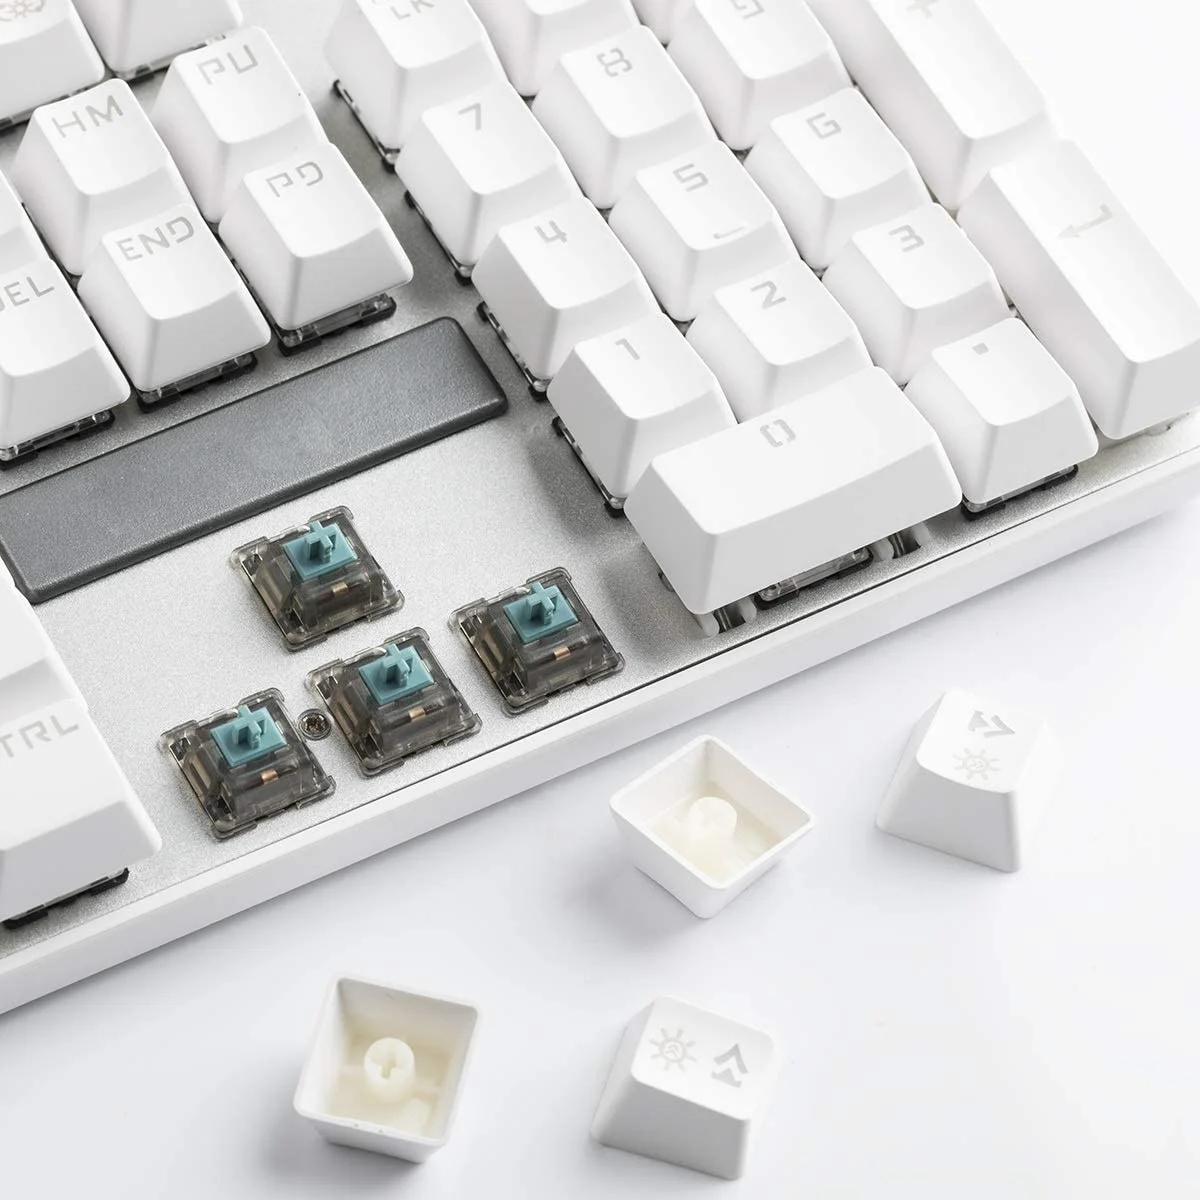 Mechanical Keyboard Switches and Key caps